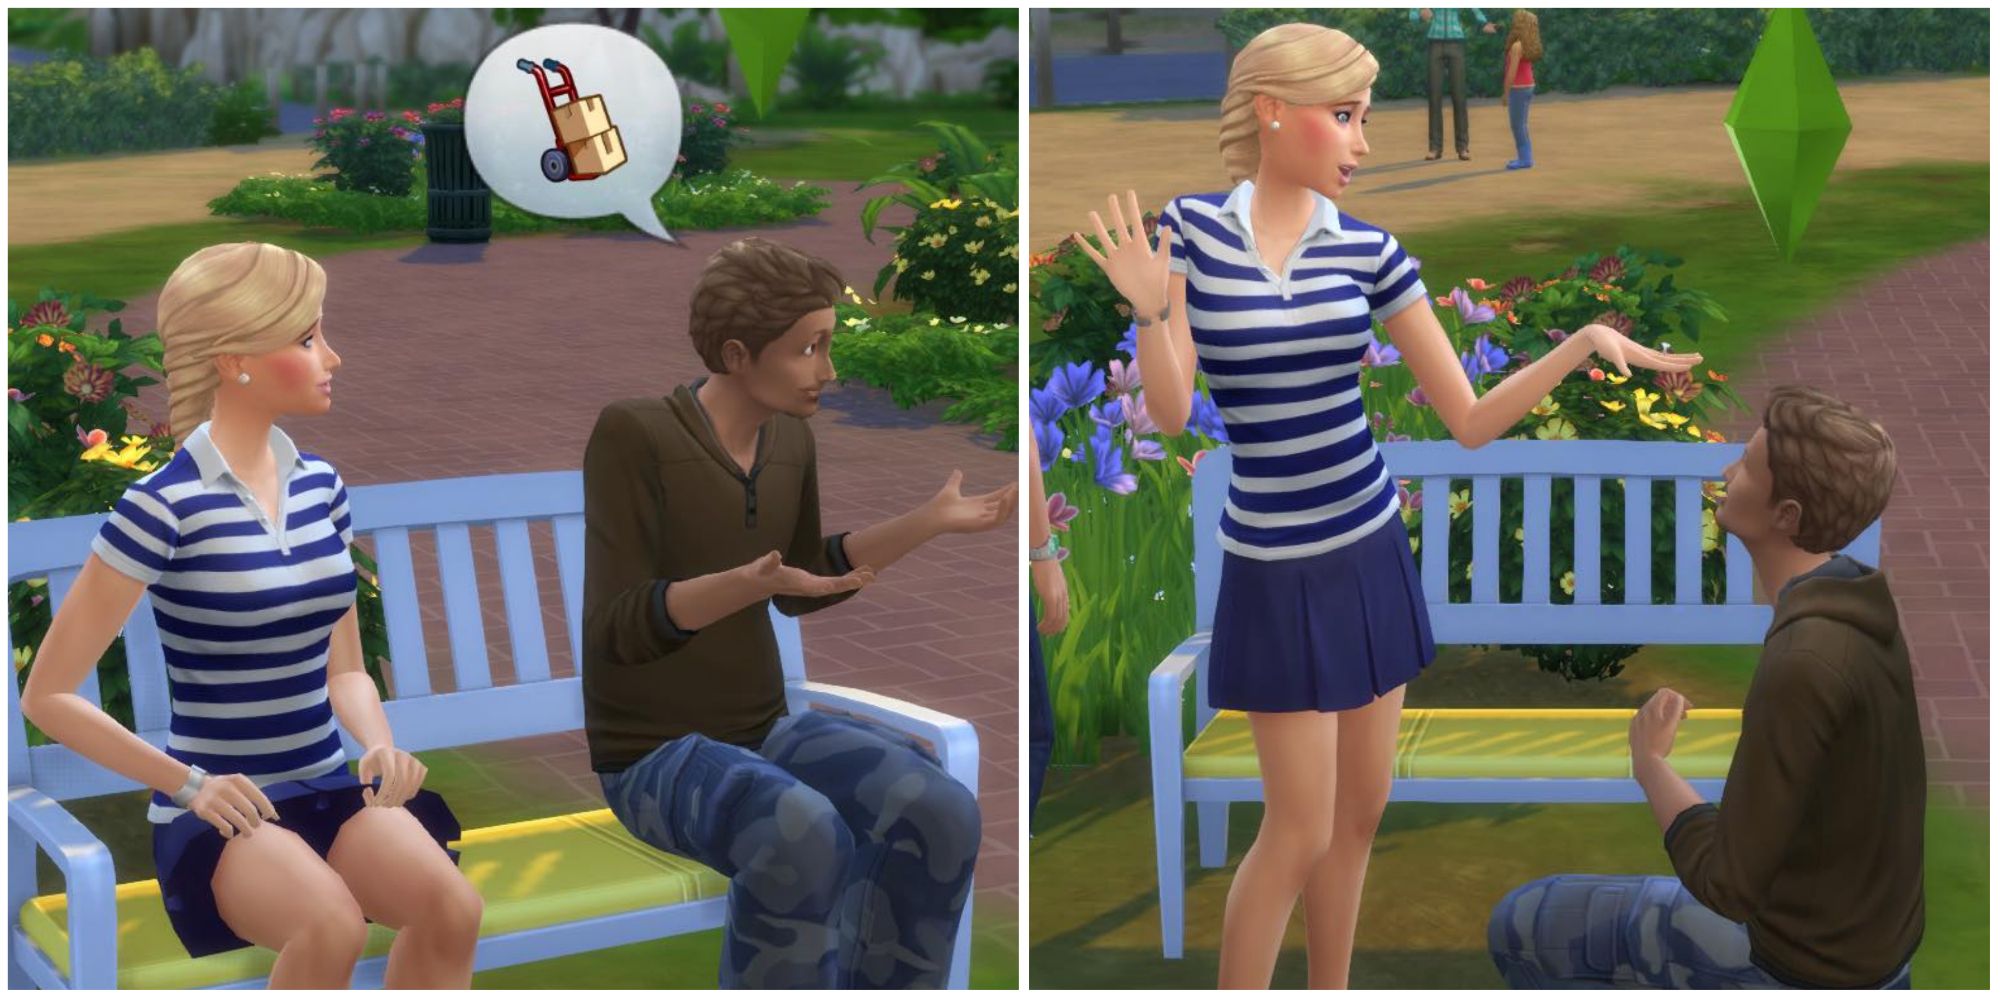 asking sim to move in, proposing